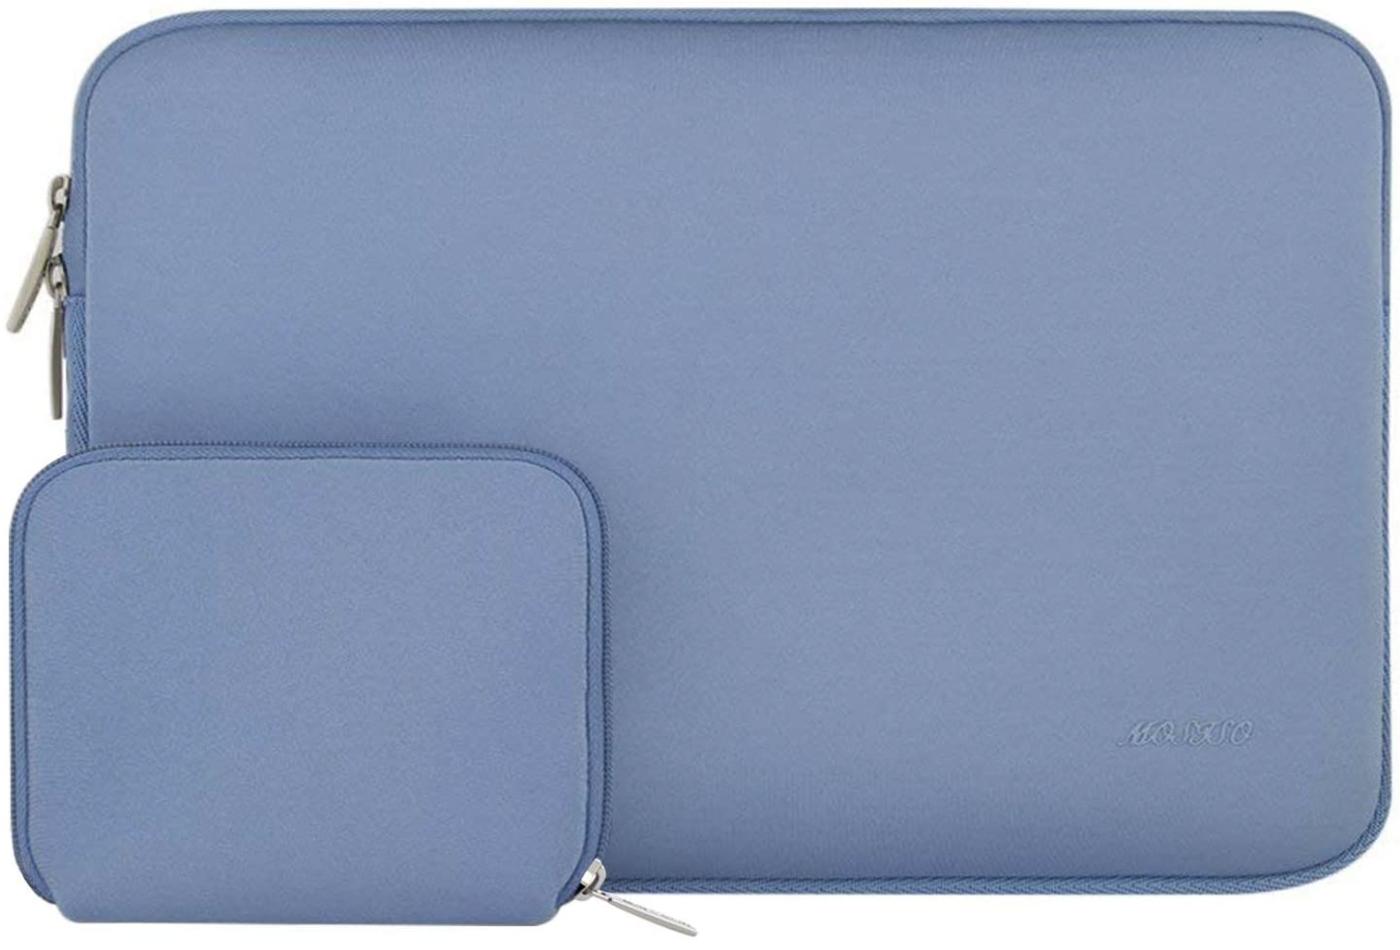 MOSISO Laptop Sleeve Small Case Render Cropped